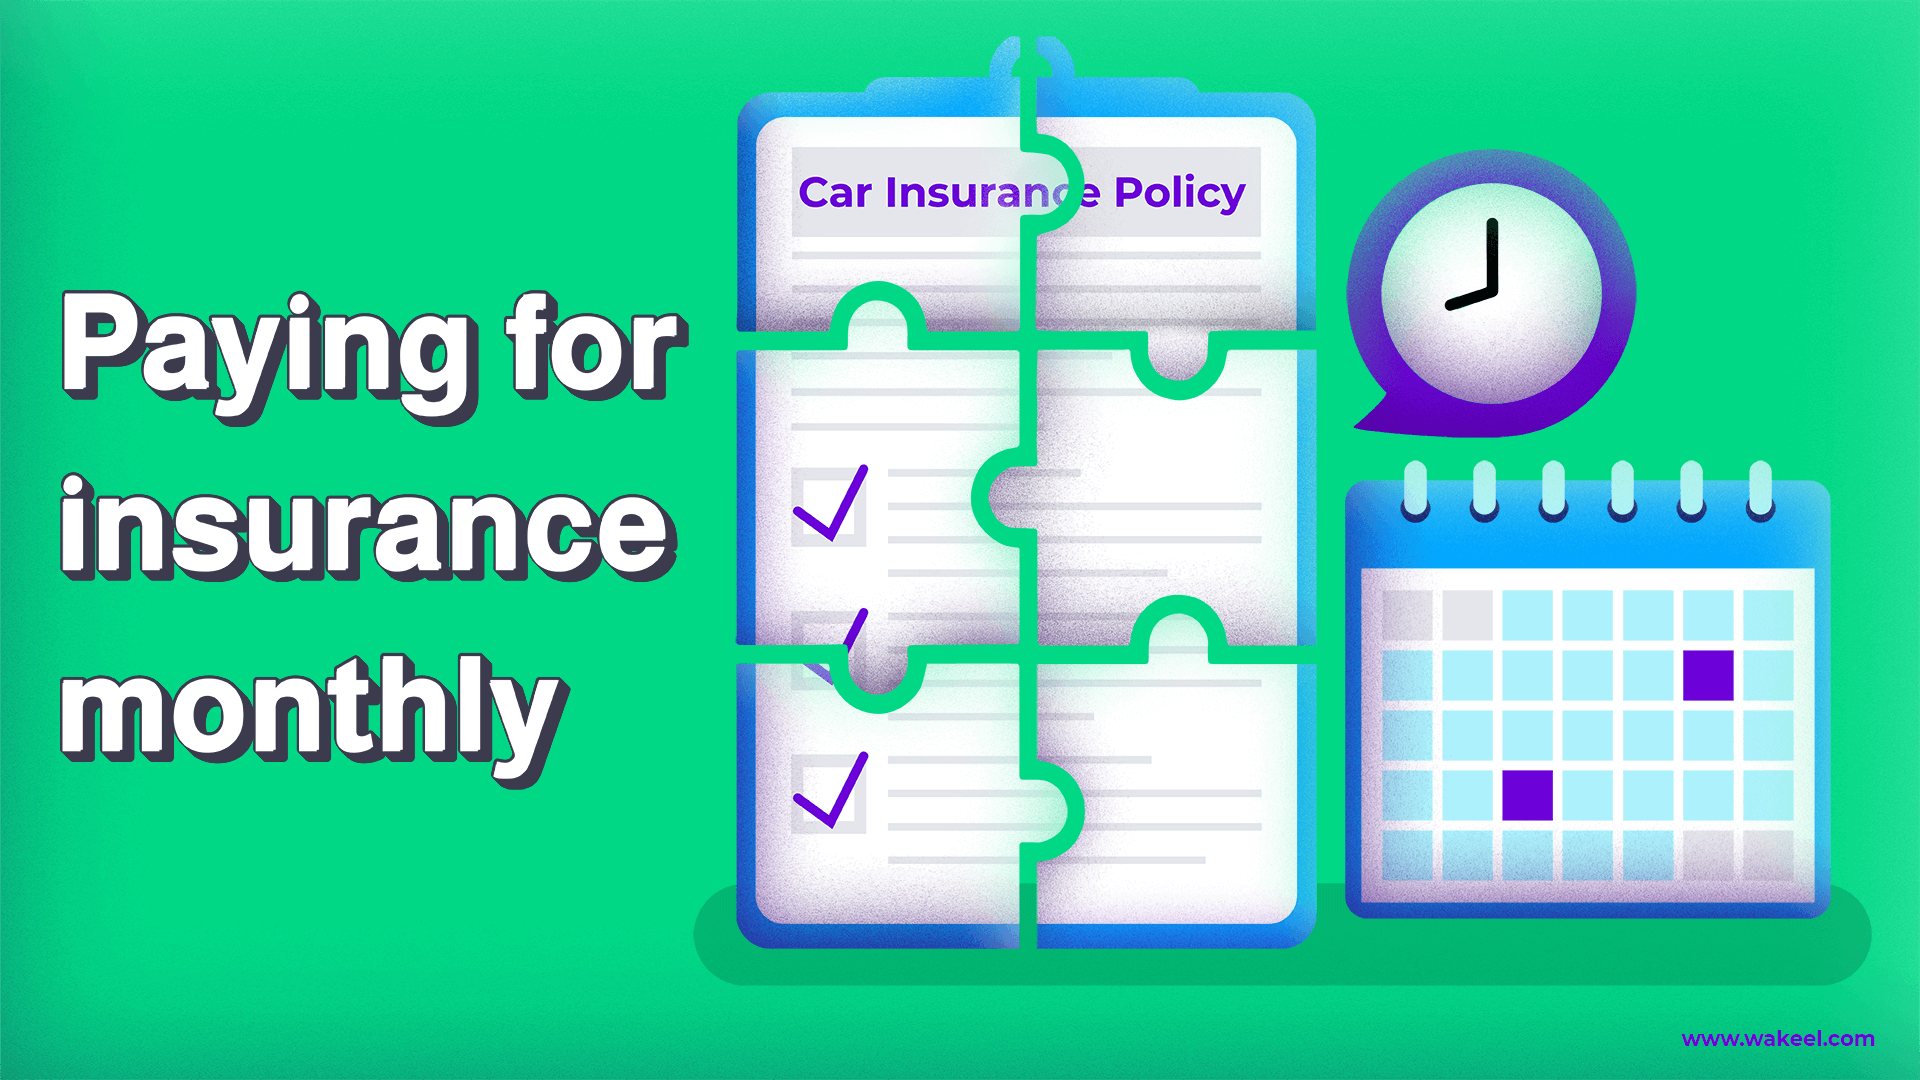 Buying car insurance policies in installments.